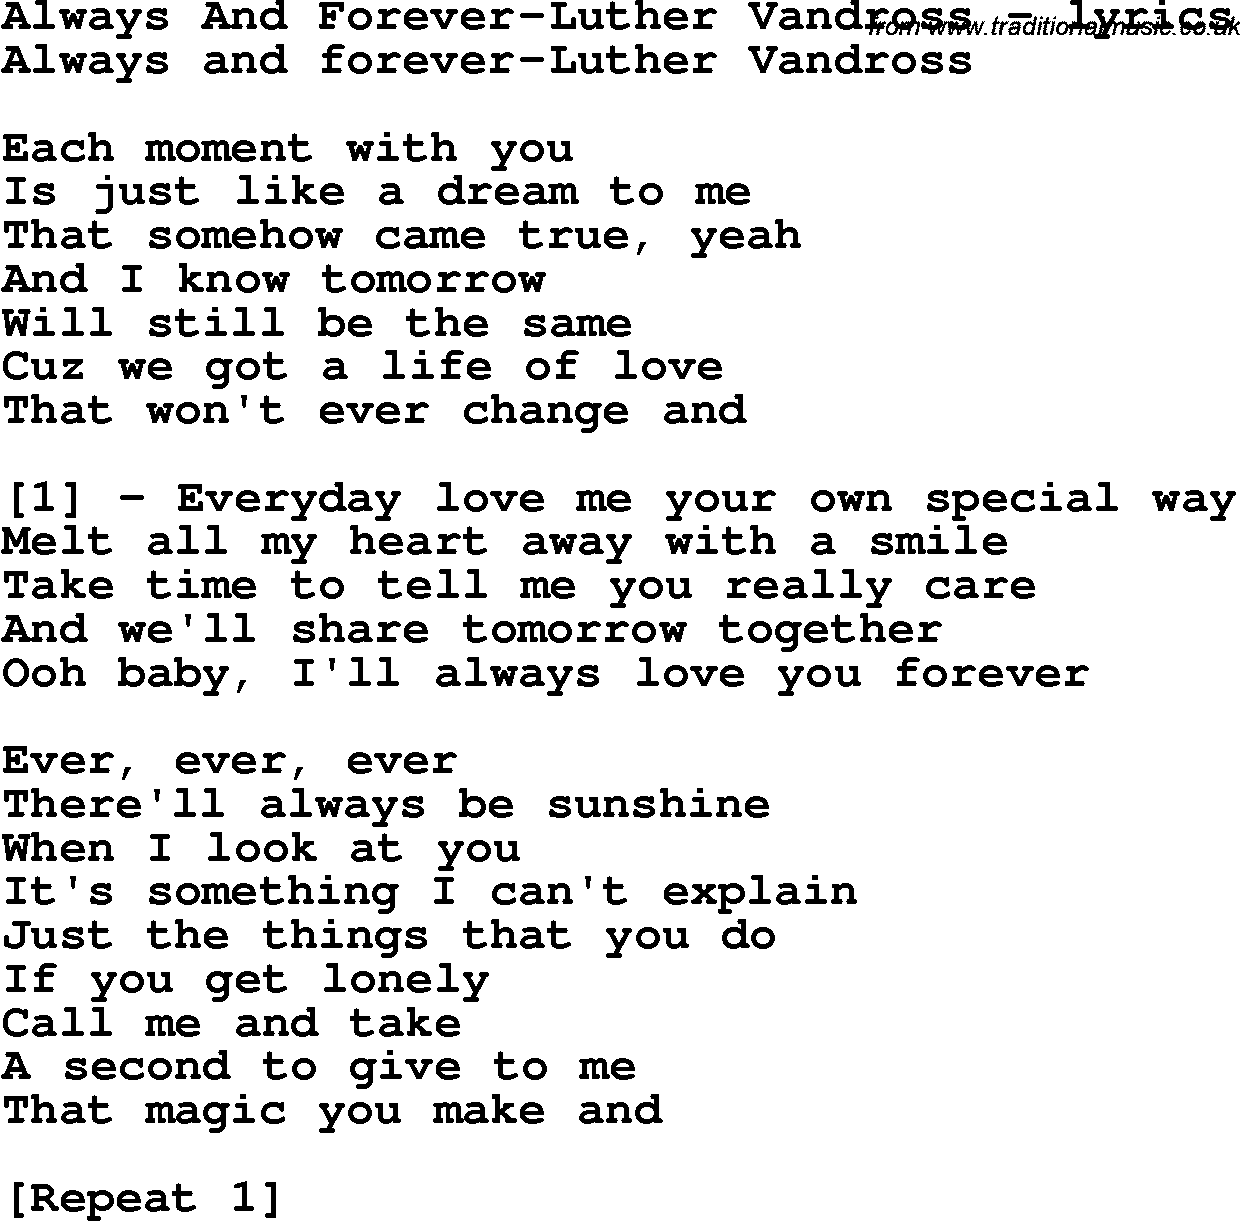 Love Song Lyrics for: Always And Forever-Luther Vandross